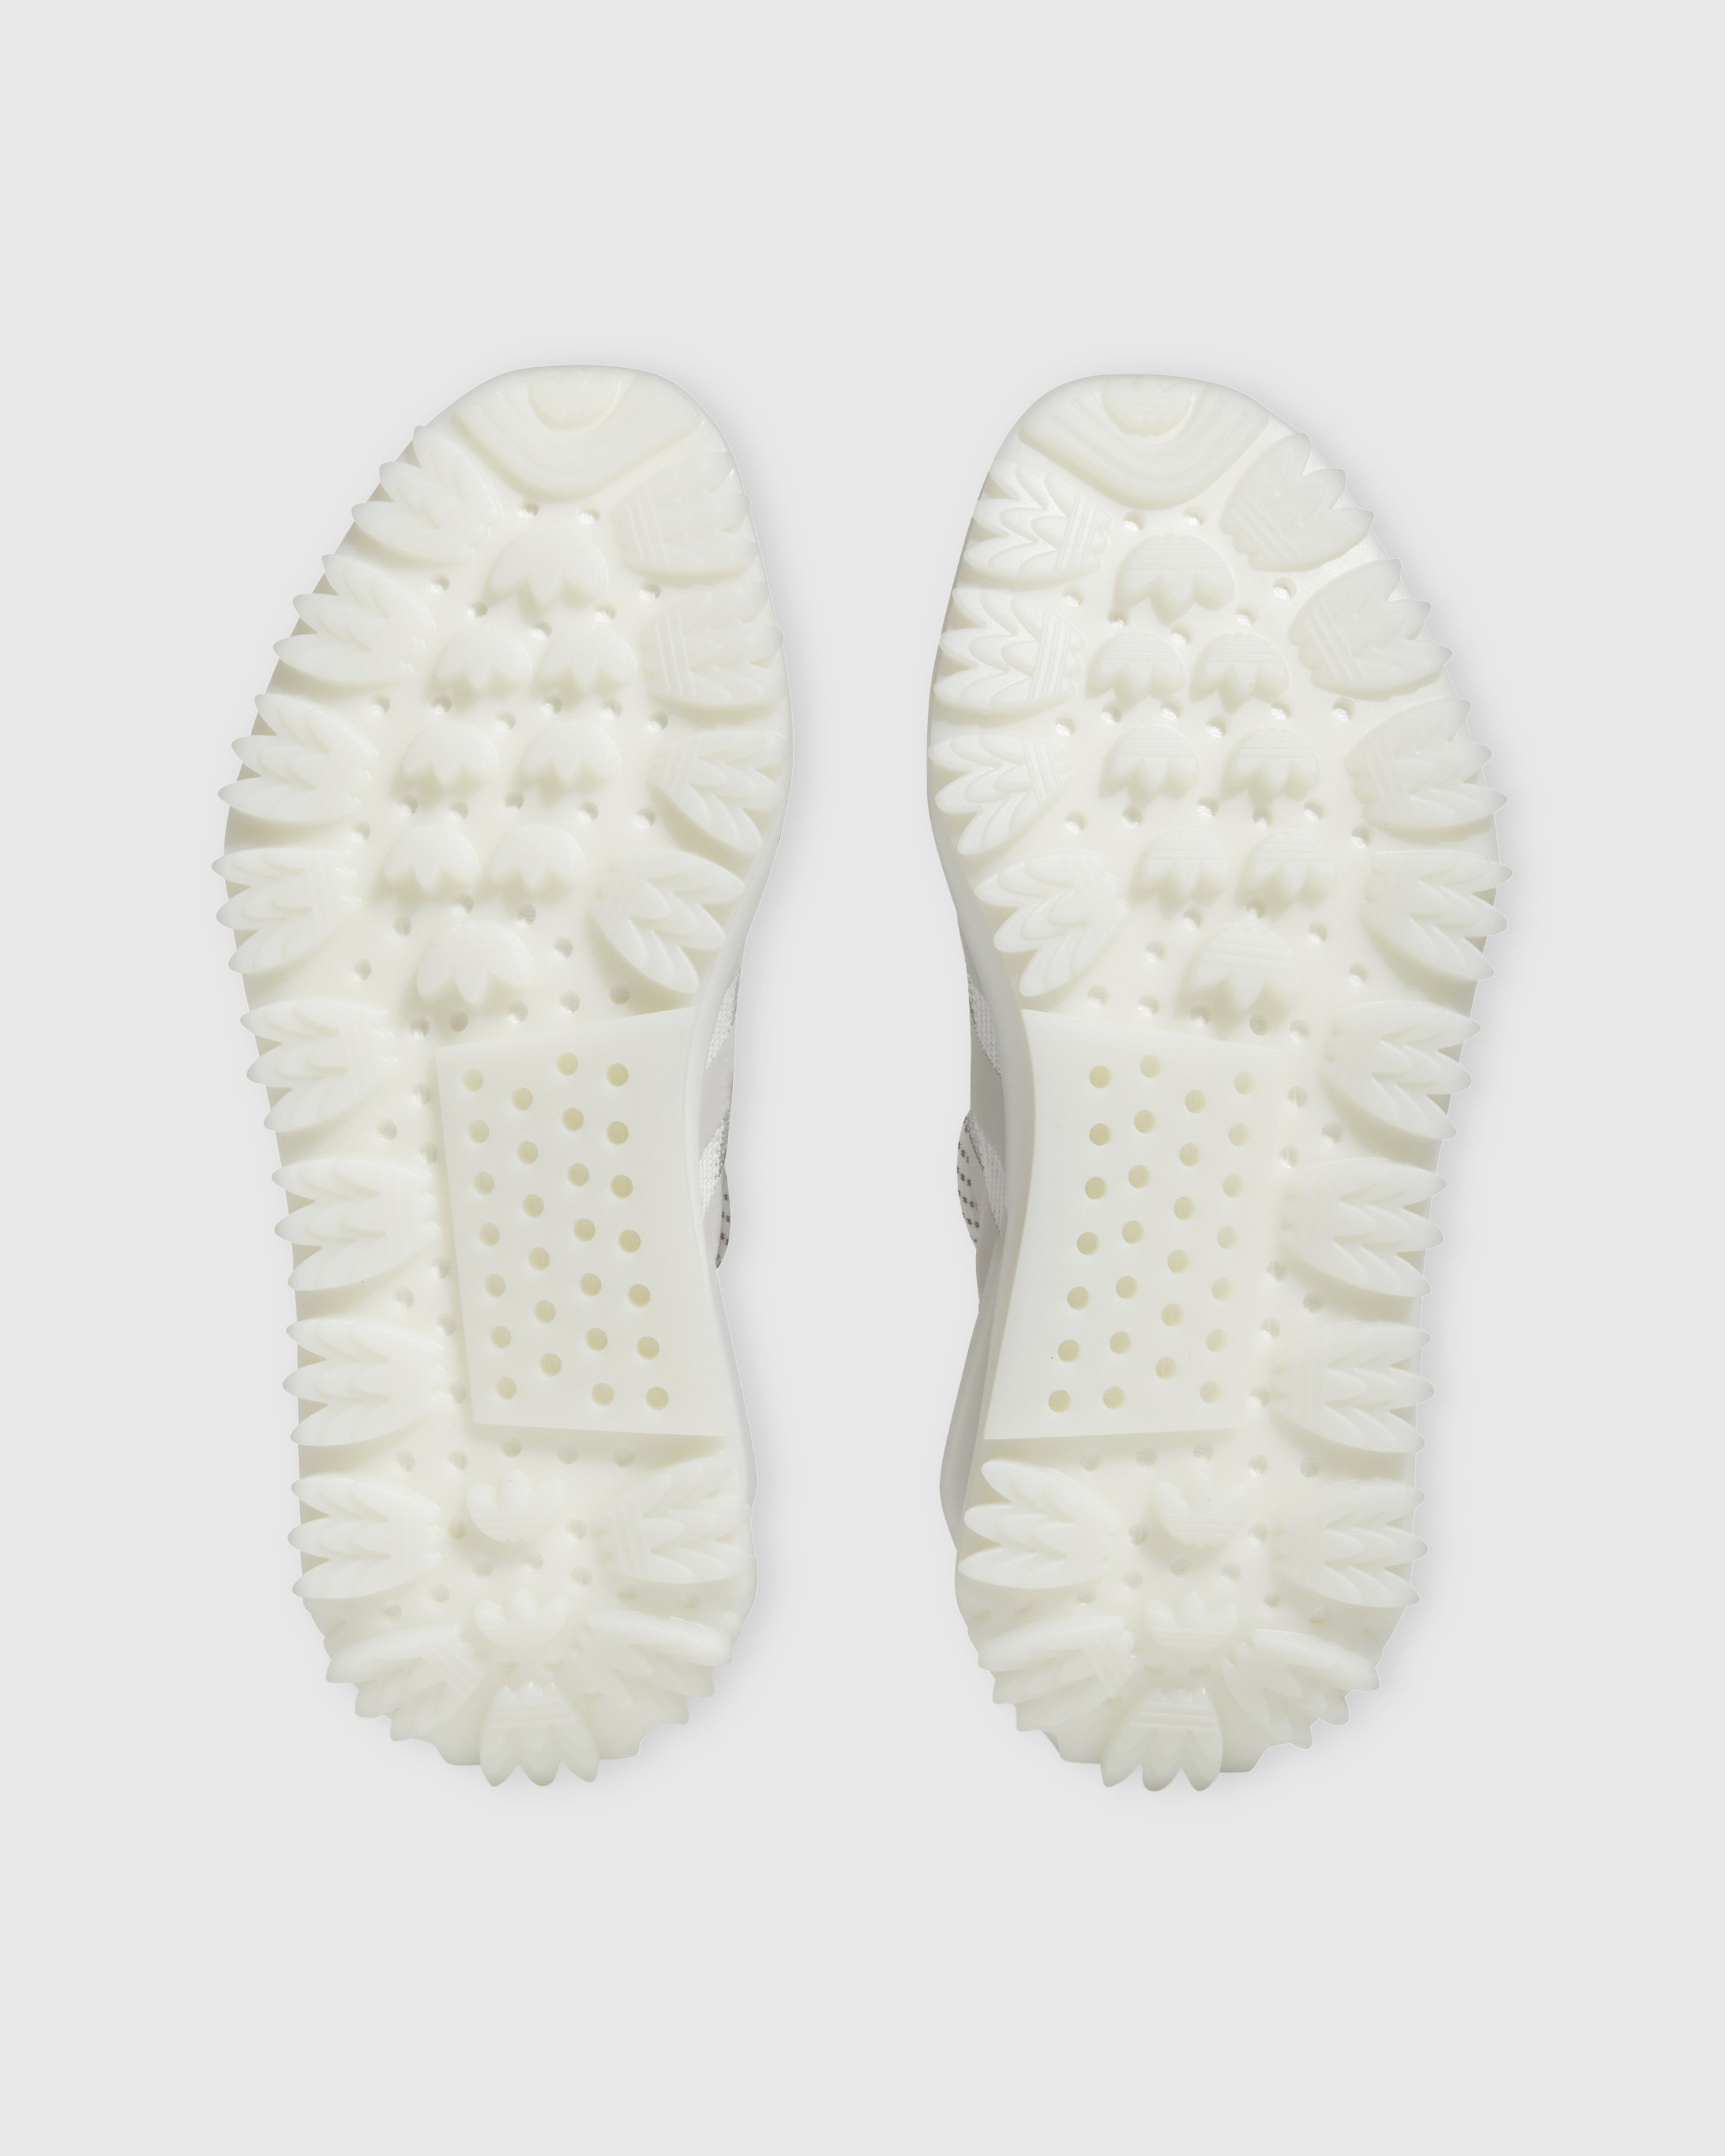 Adidas – NMD S1 - Sneakers - White - Image 5